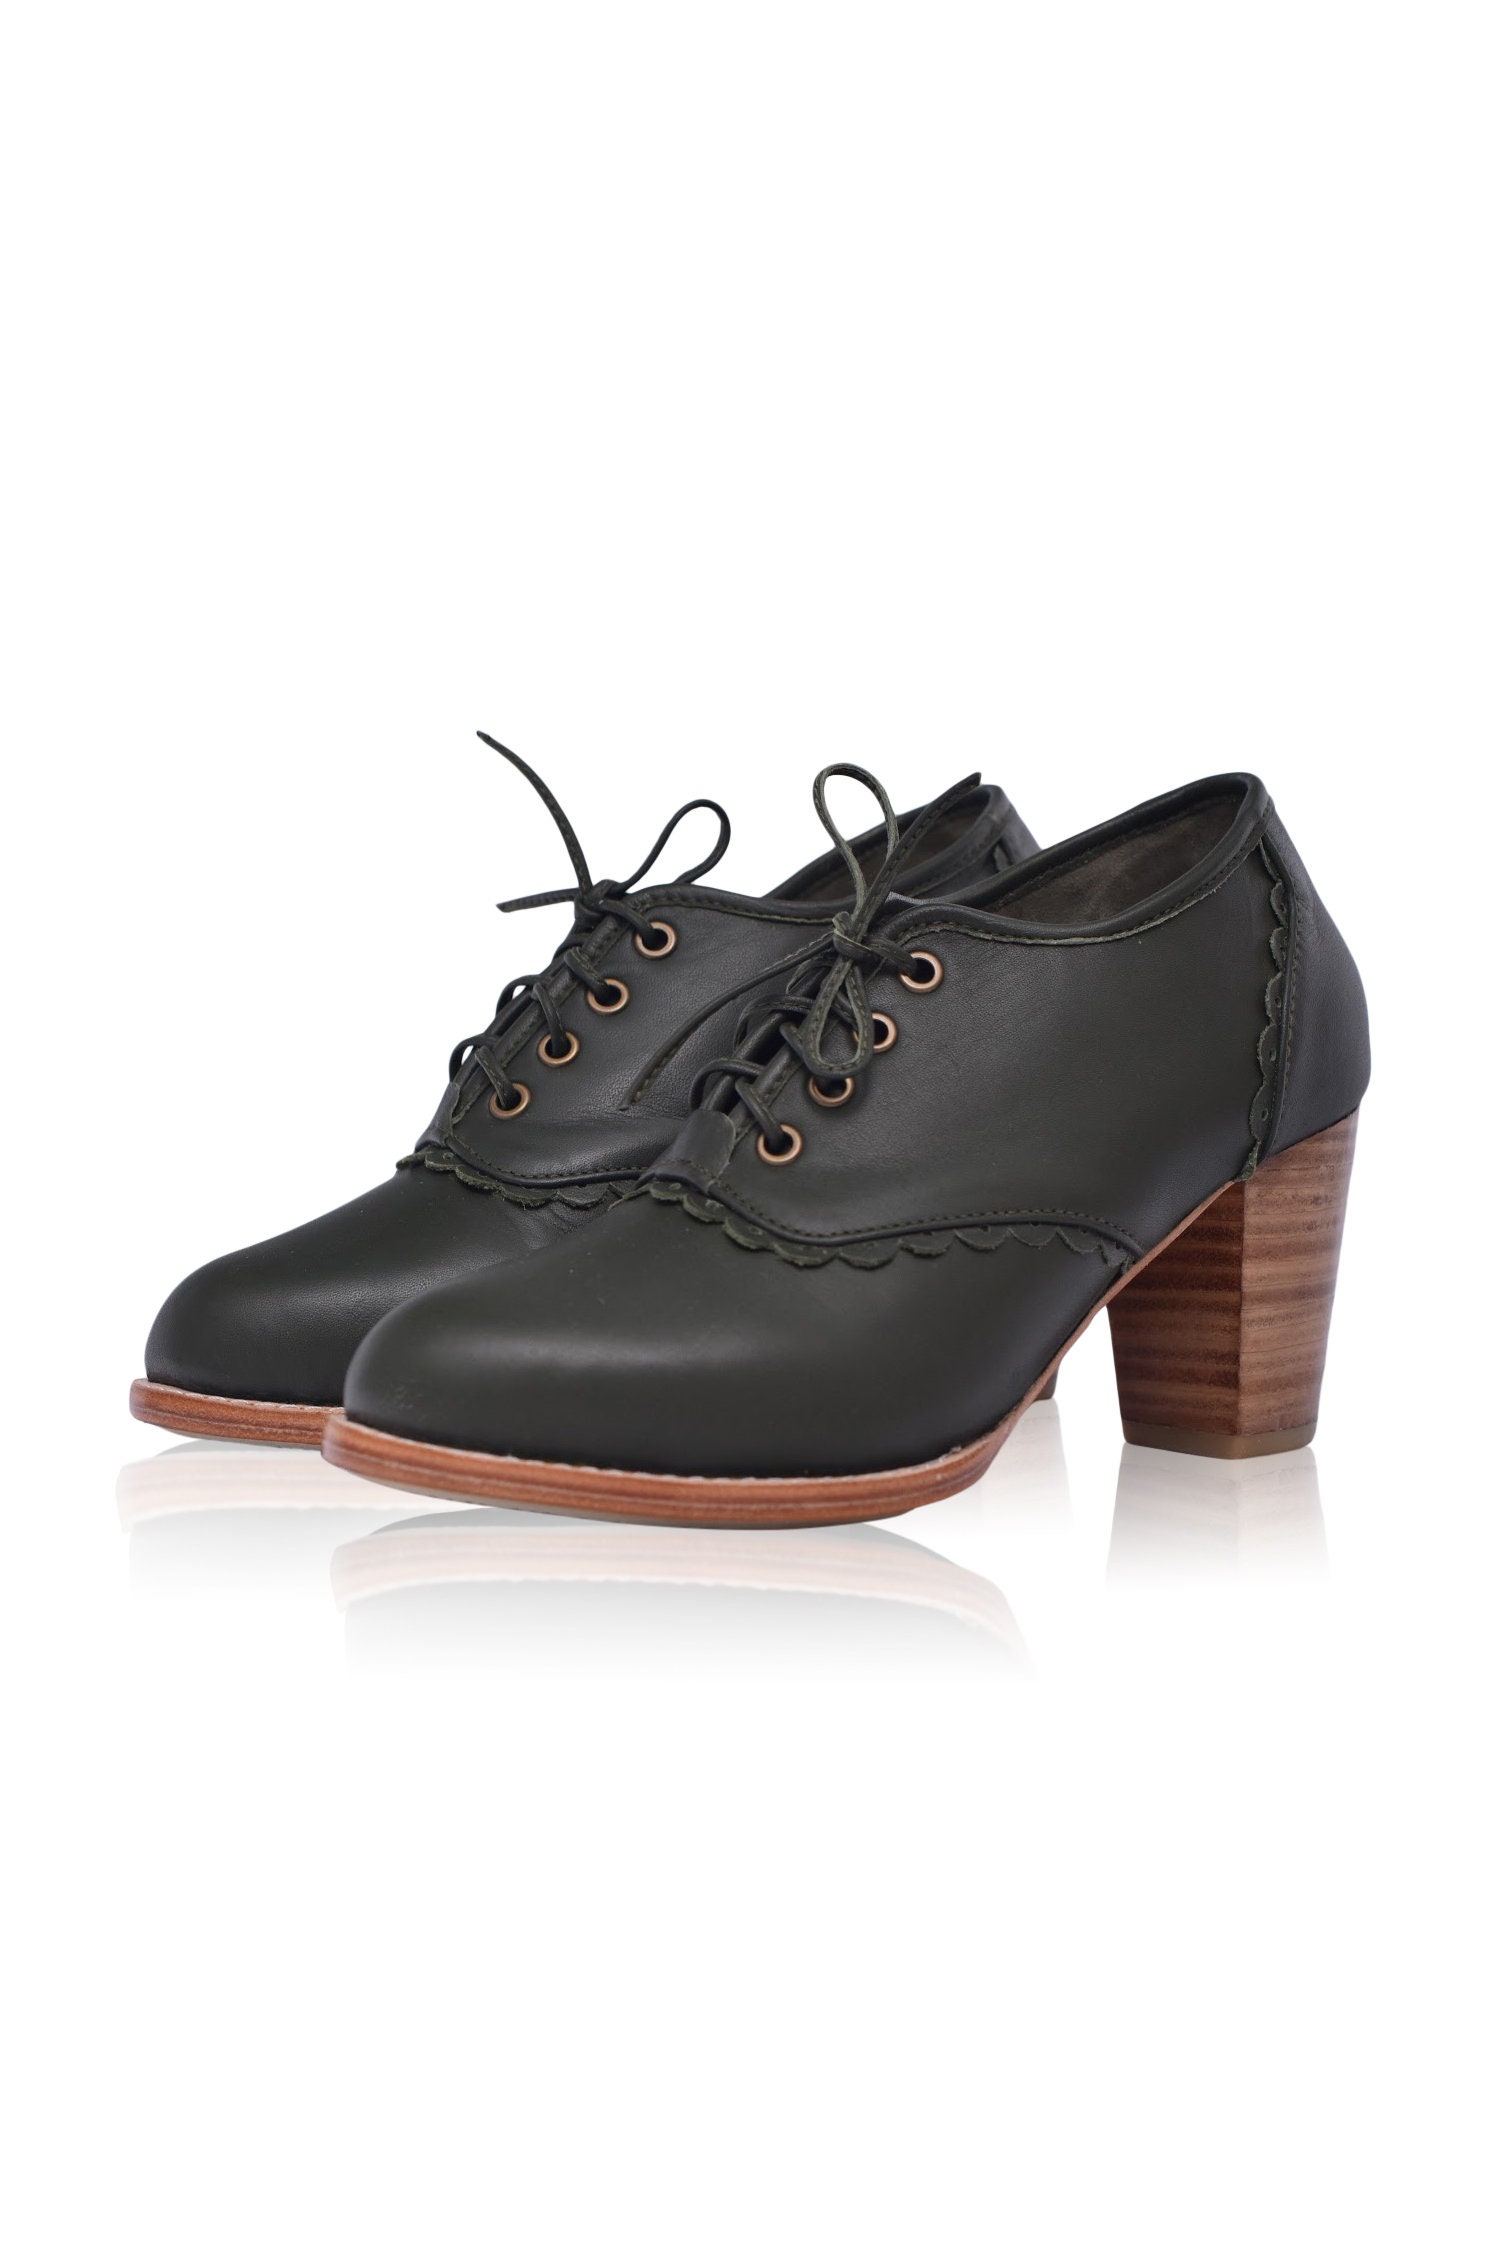 Energy Women's lace-up brogues with heels: for sale at 27.99€ on  Mecshopping.it